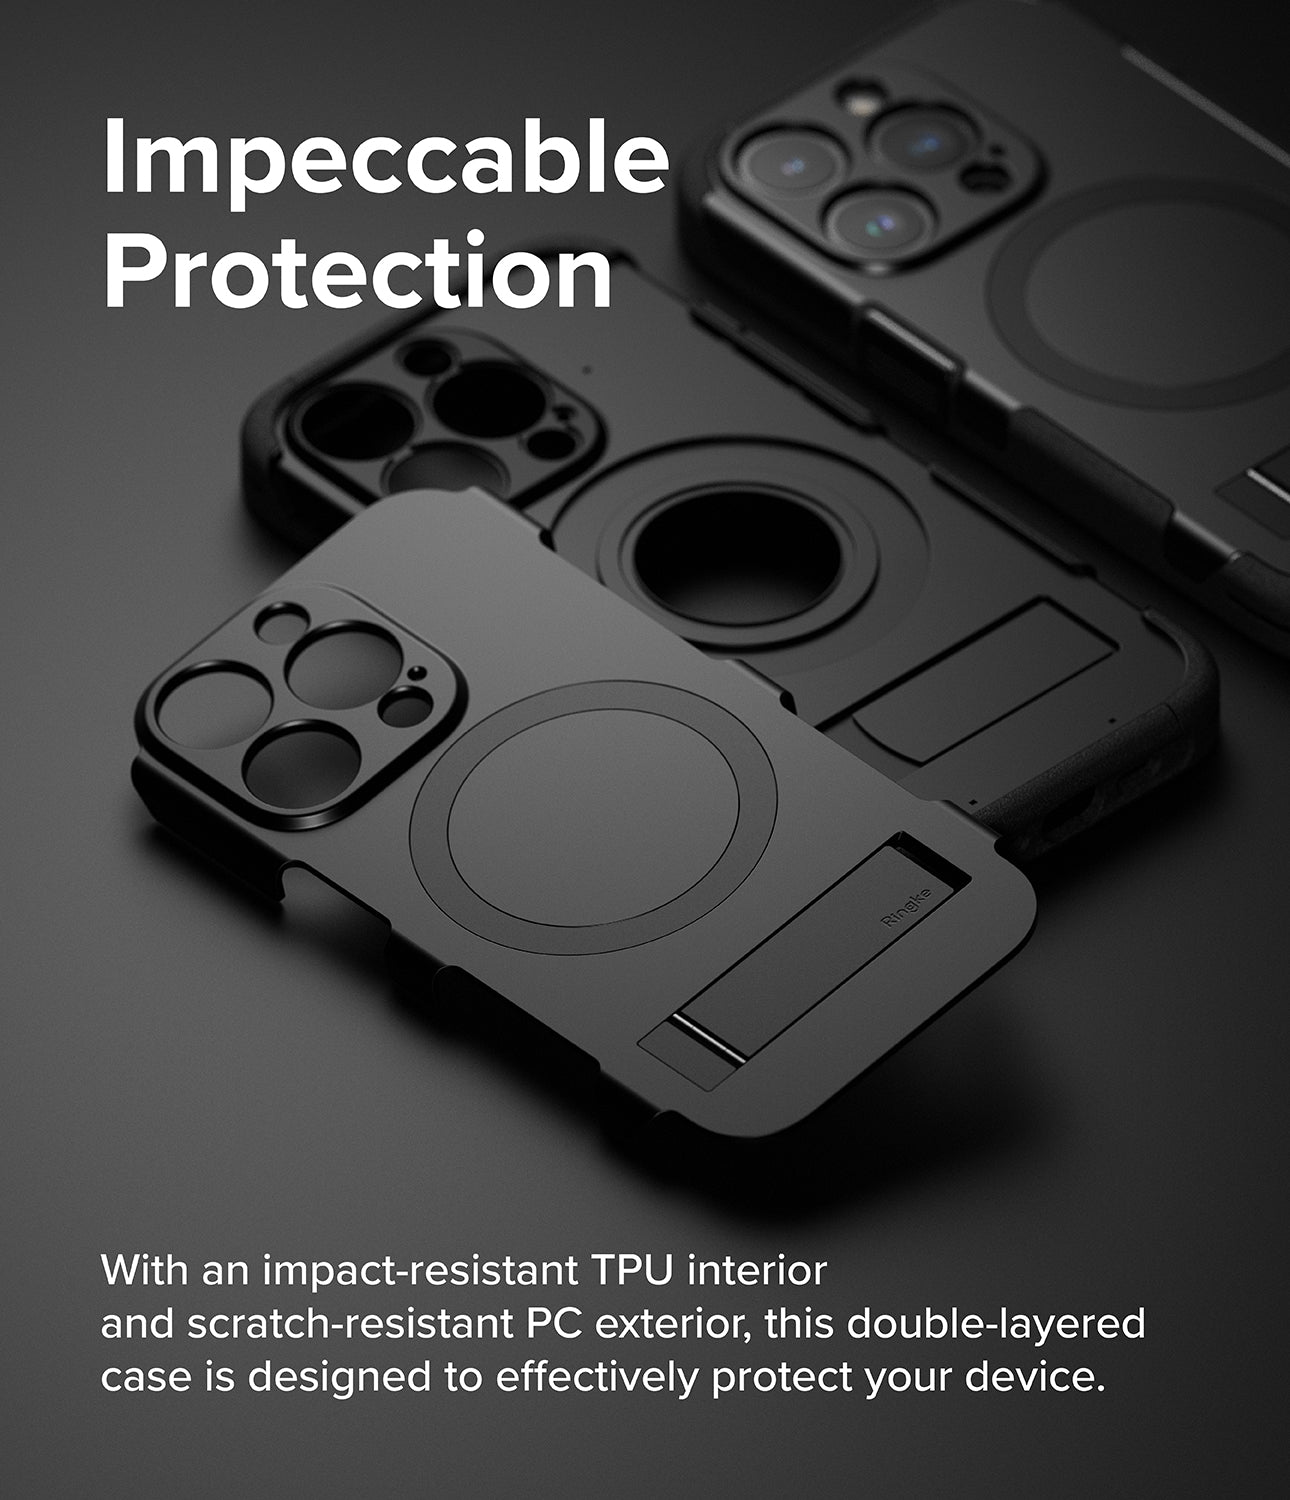 iPhone 15 Pro Case | Alles - Impeccable Protection. With an impact-resistant TPU interior and scratch-resistant PC exterior, this double-layered case is designed to effectively protect your device.